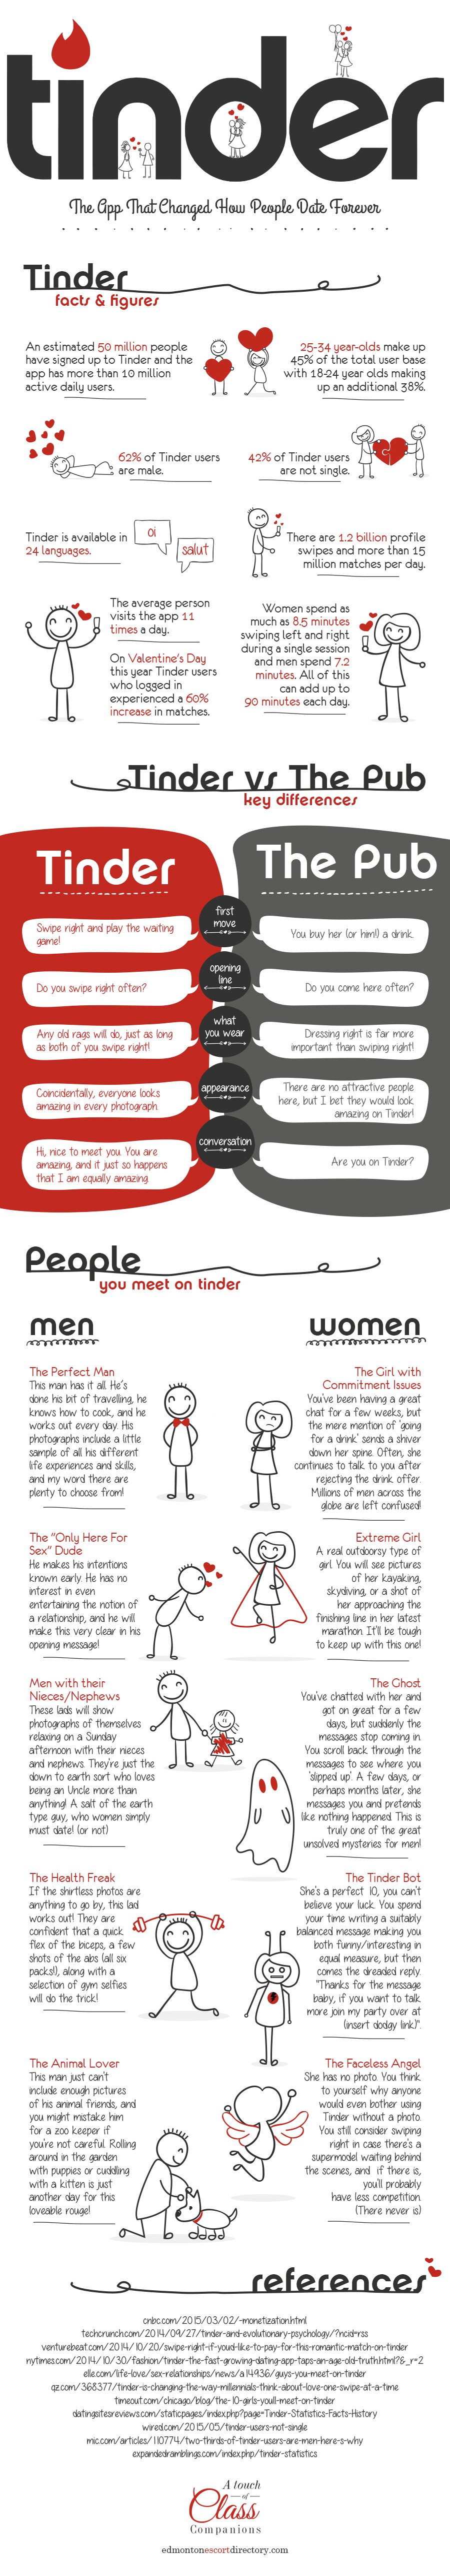 Tinder-How-It-Changed-the-Dating-Game-Forever-Infographic